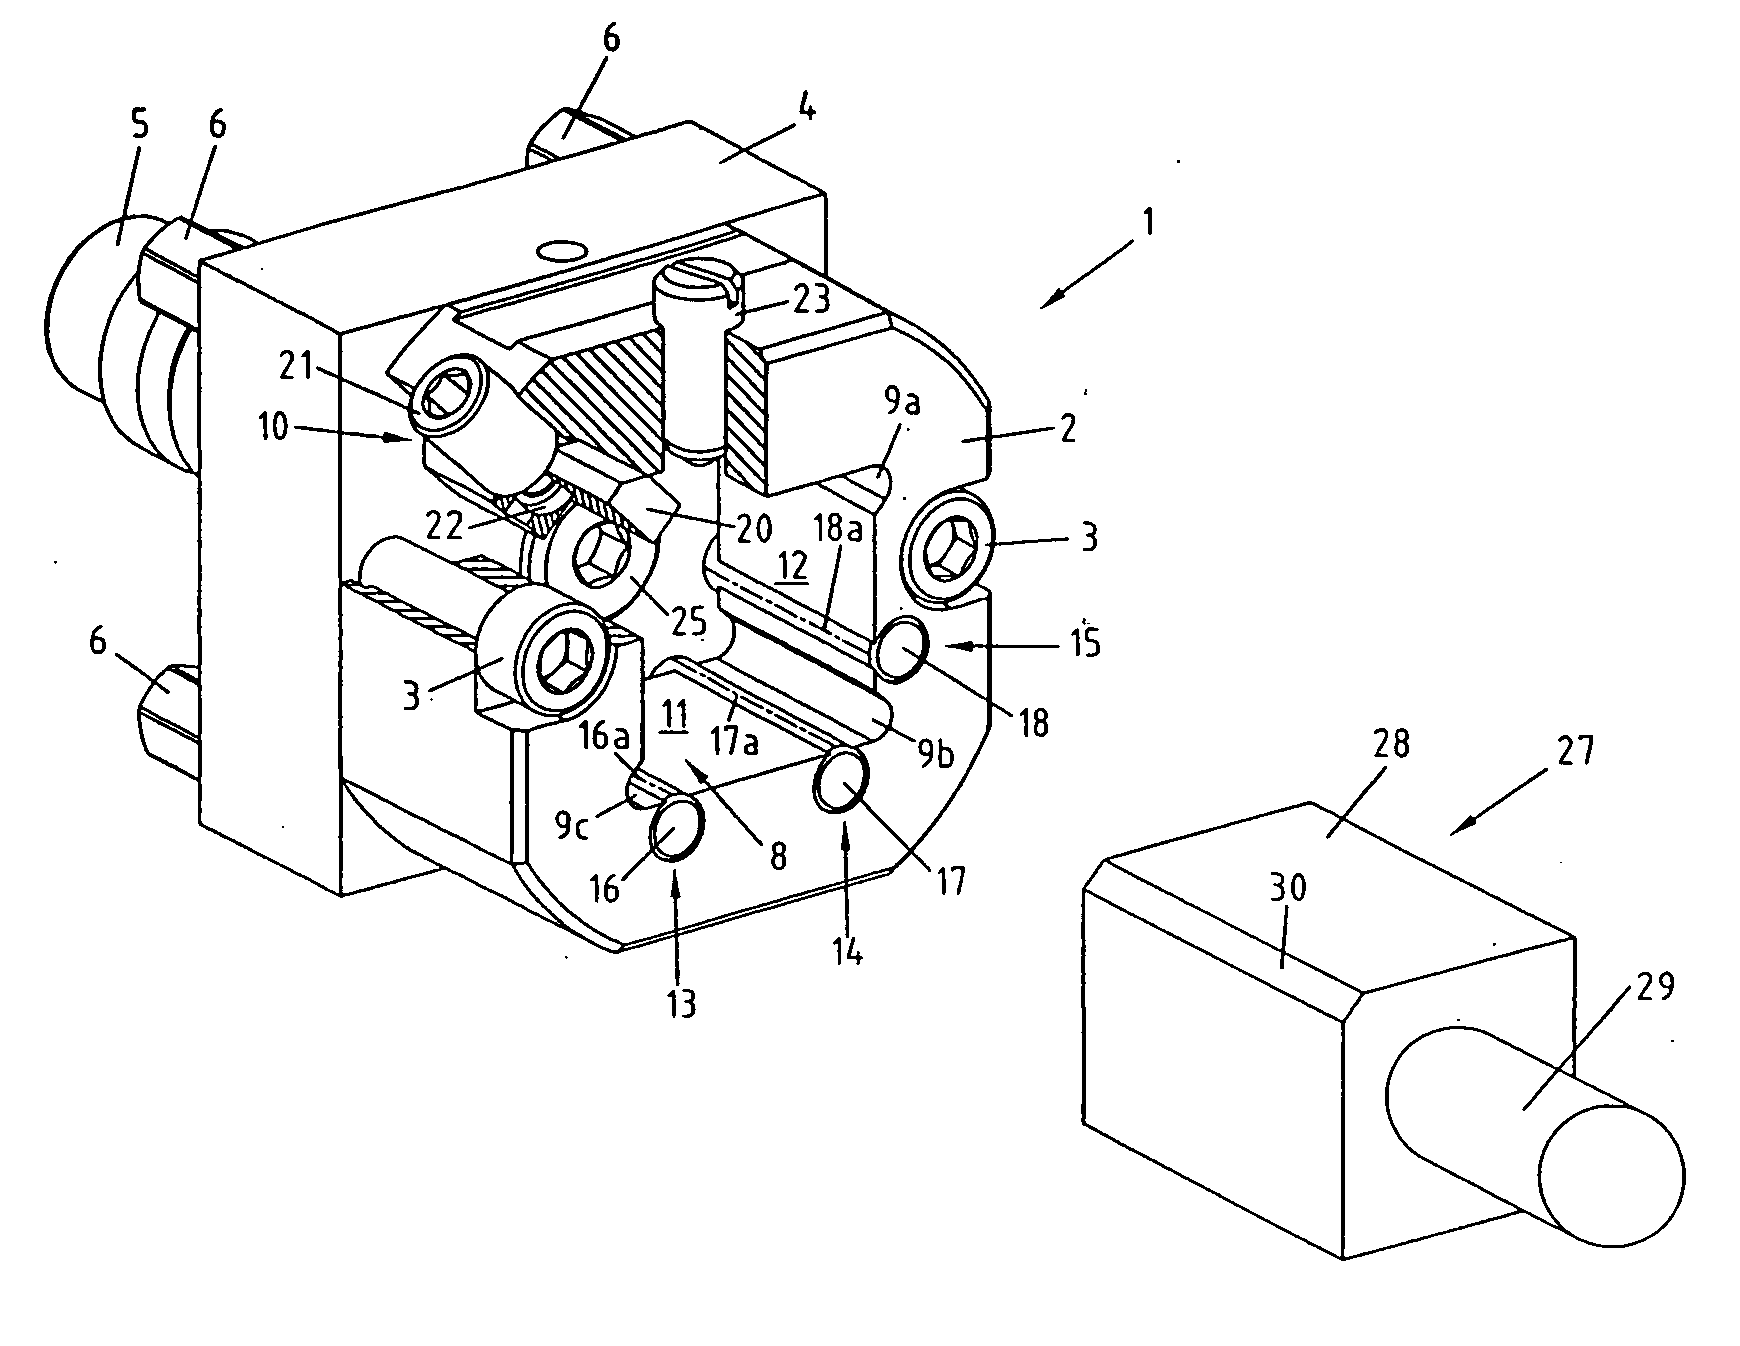 Apparatus for clamping work pieces